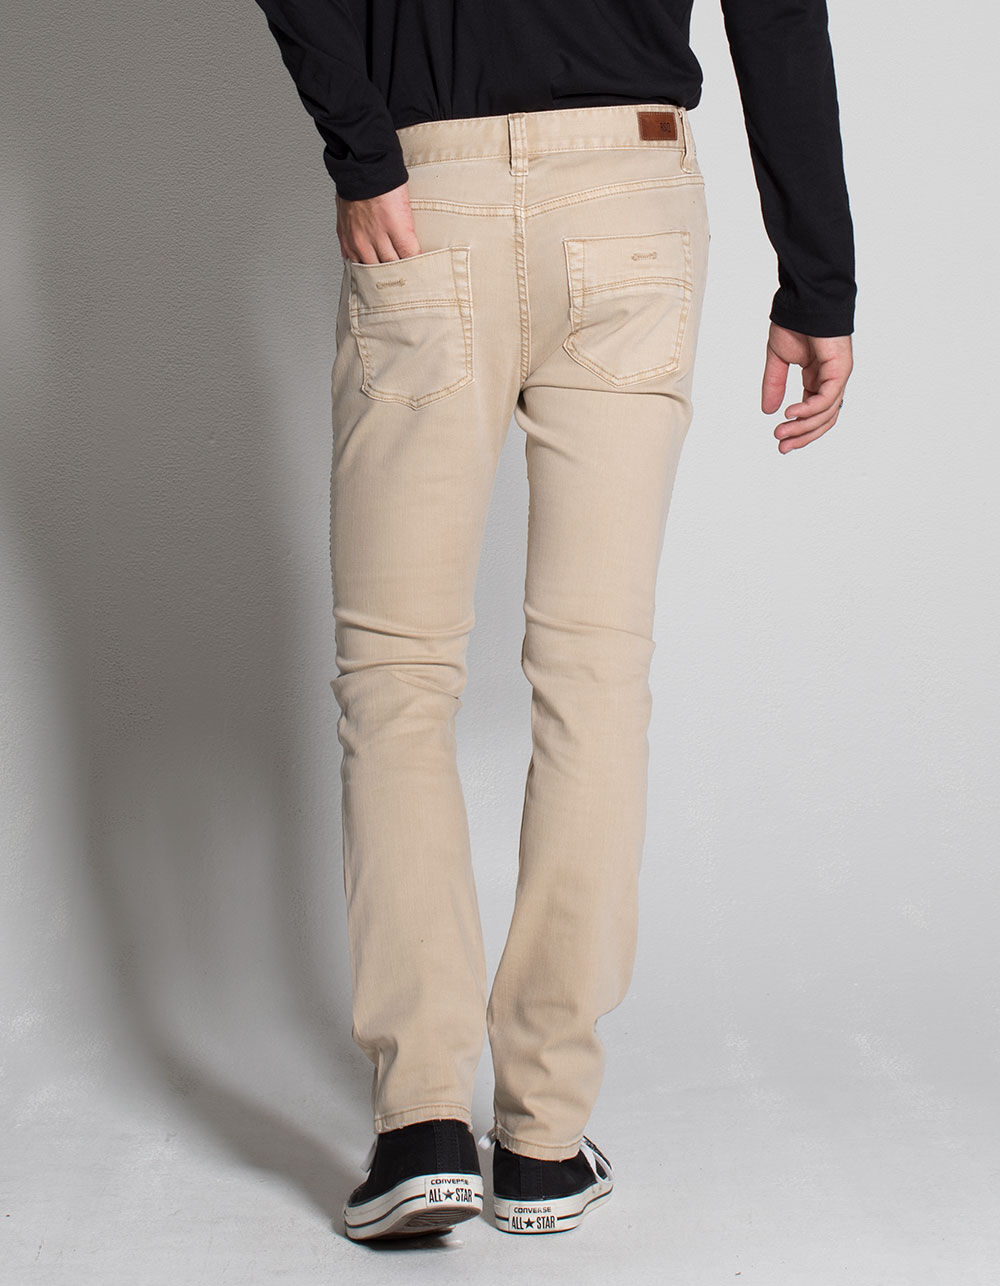 RSQ London Twill Moto Mens Skinny Ripped Jeans - SAND | Tillys